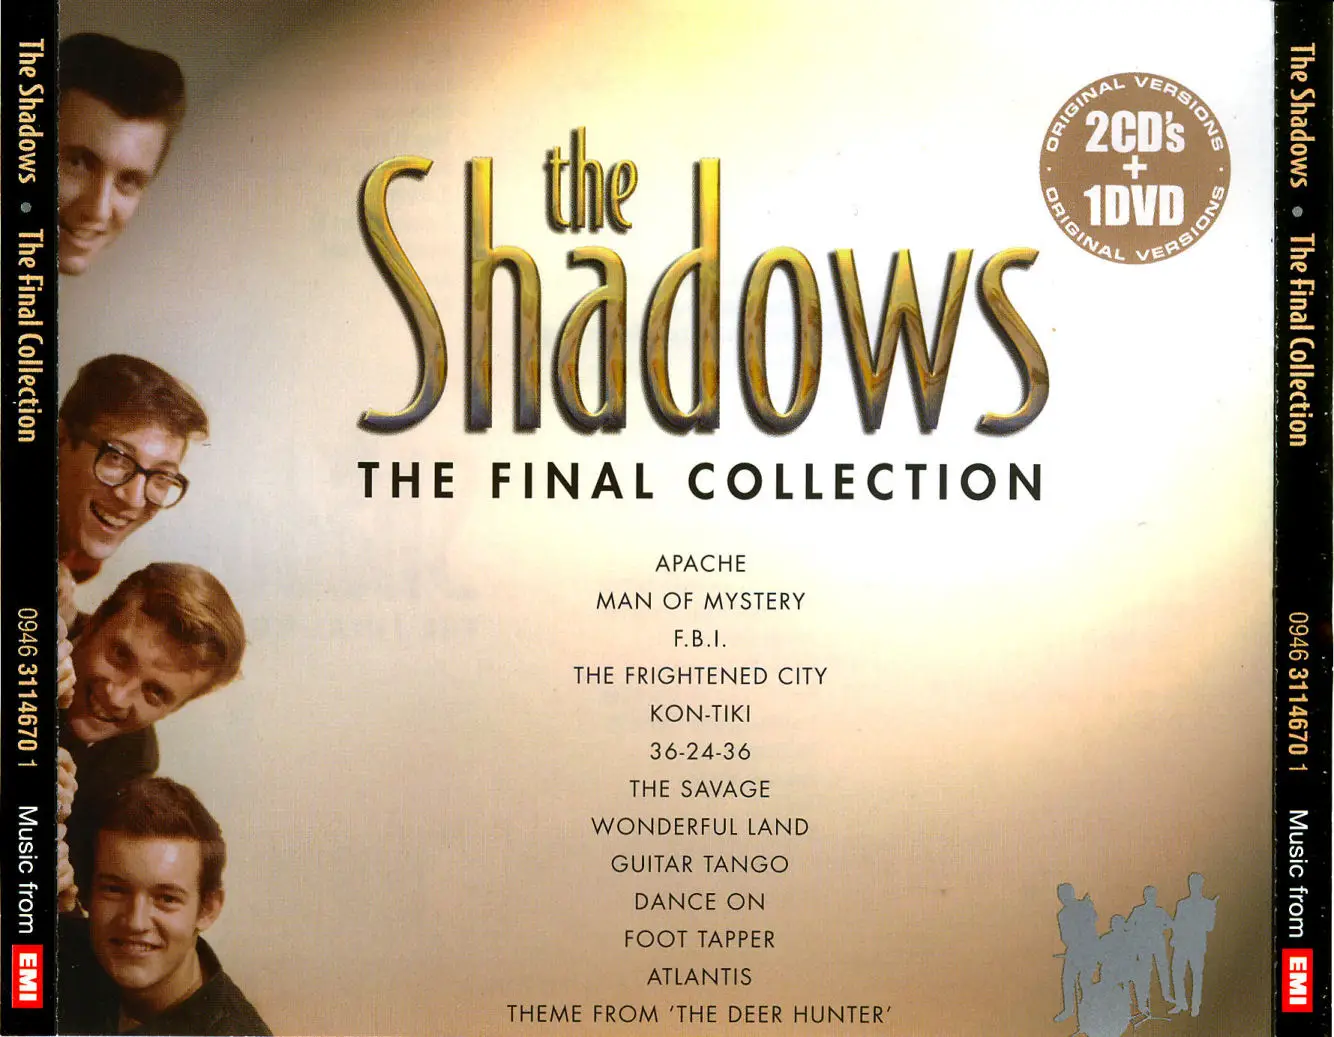 Collection 2005. The Shadows Platinum collection. The Shadows-альбомы. CD Platinum collection. CD альбомы 2005.